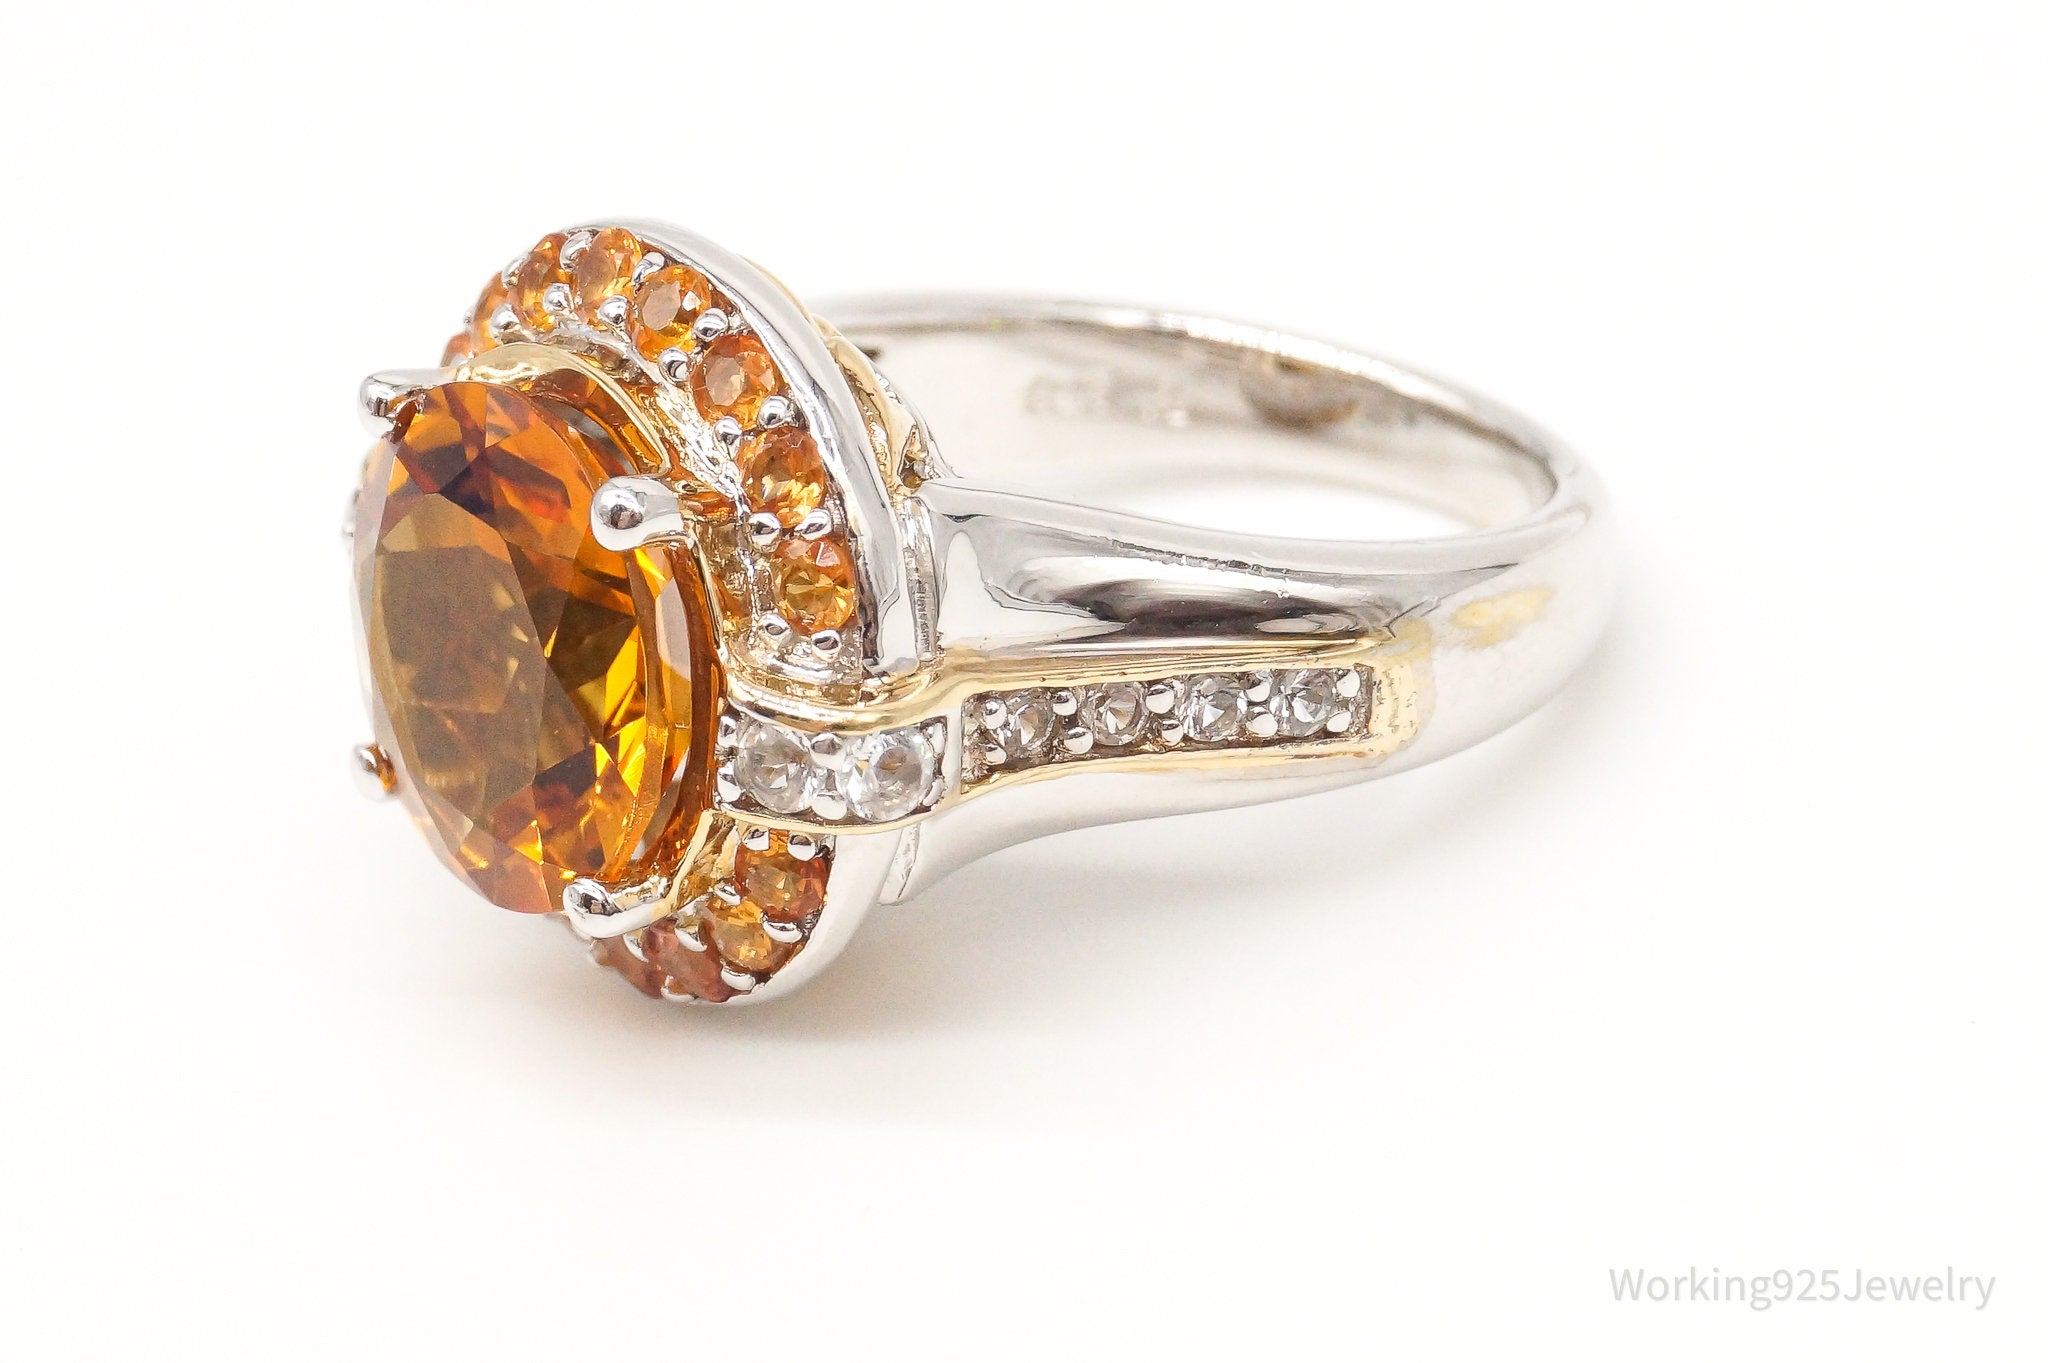 Large Citrine Cubic Zirconia Gold Vermeil Sterling Silver Ring - Size 6